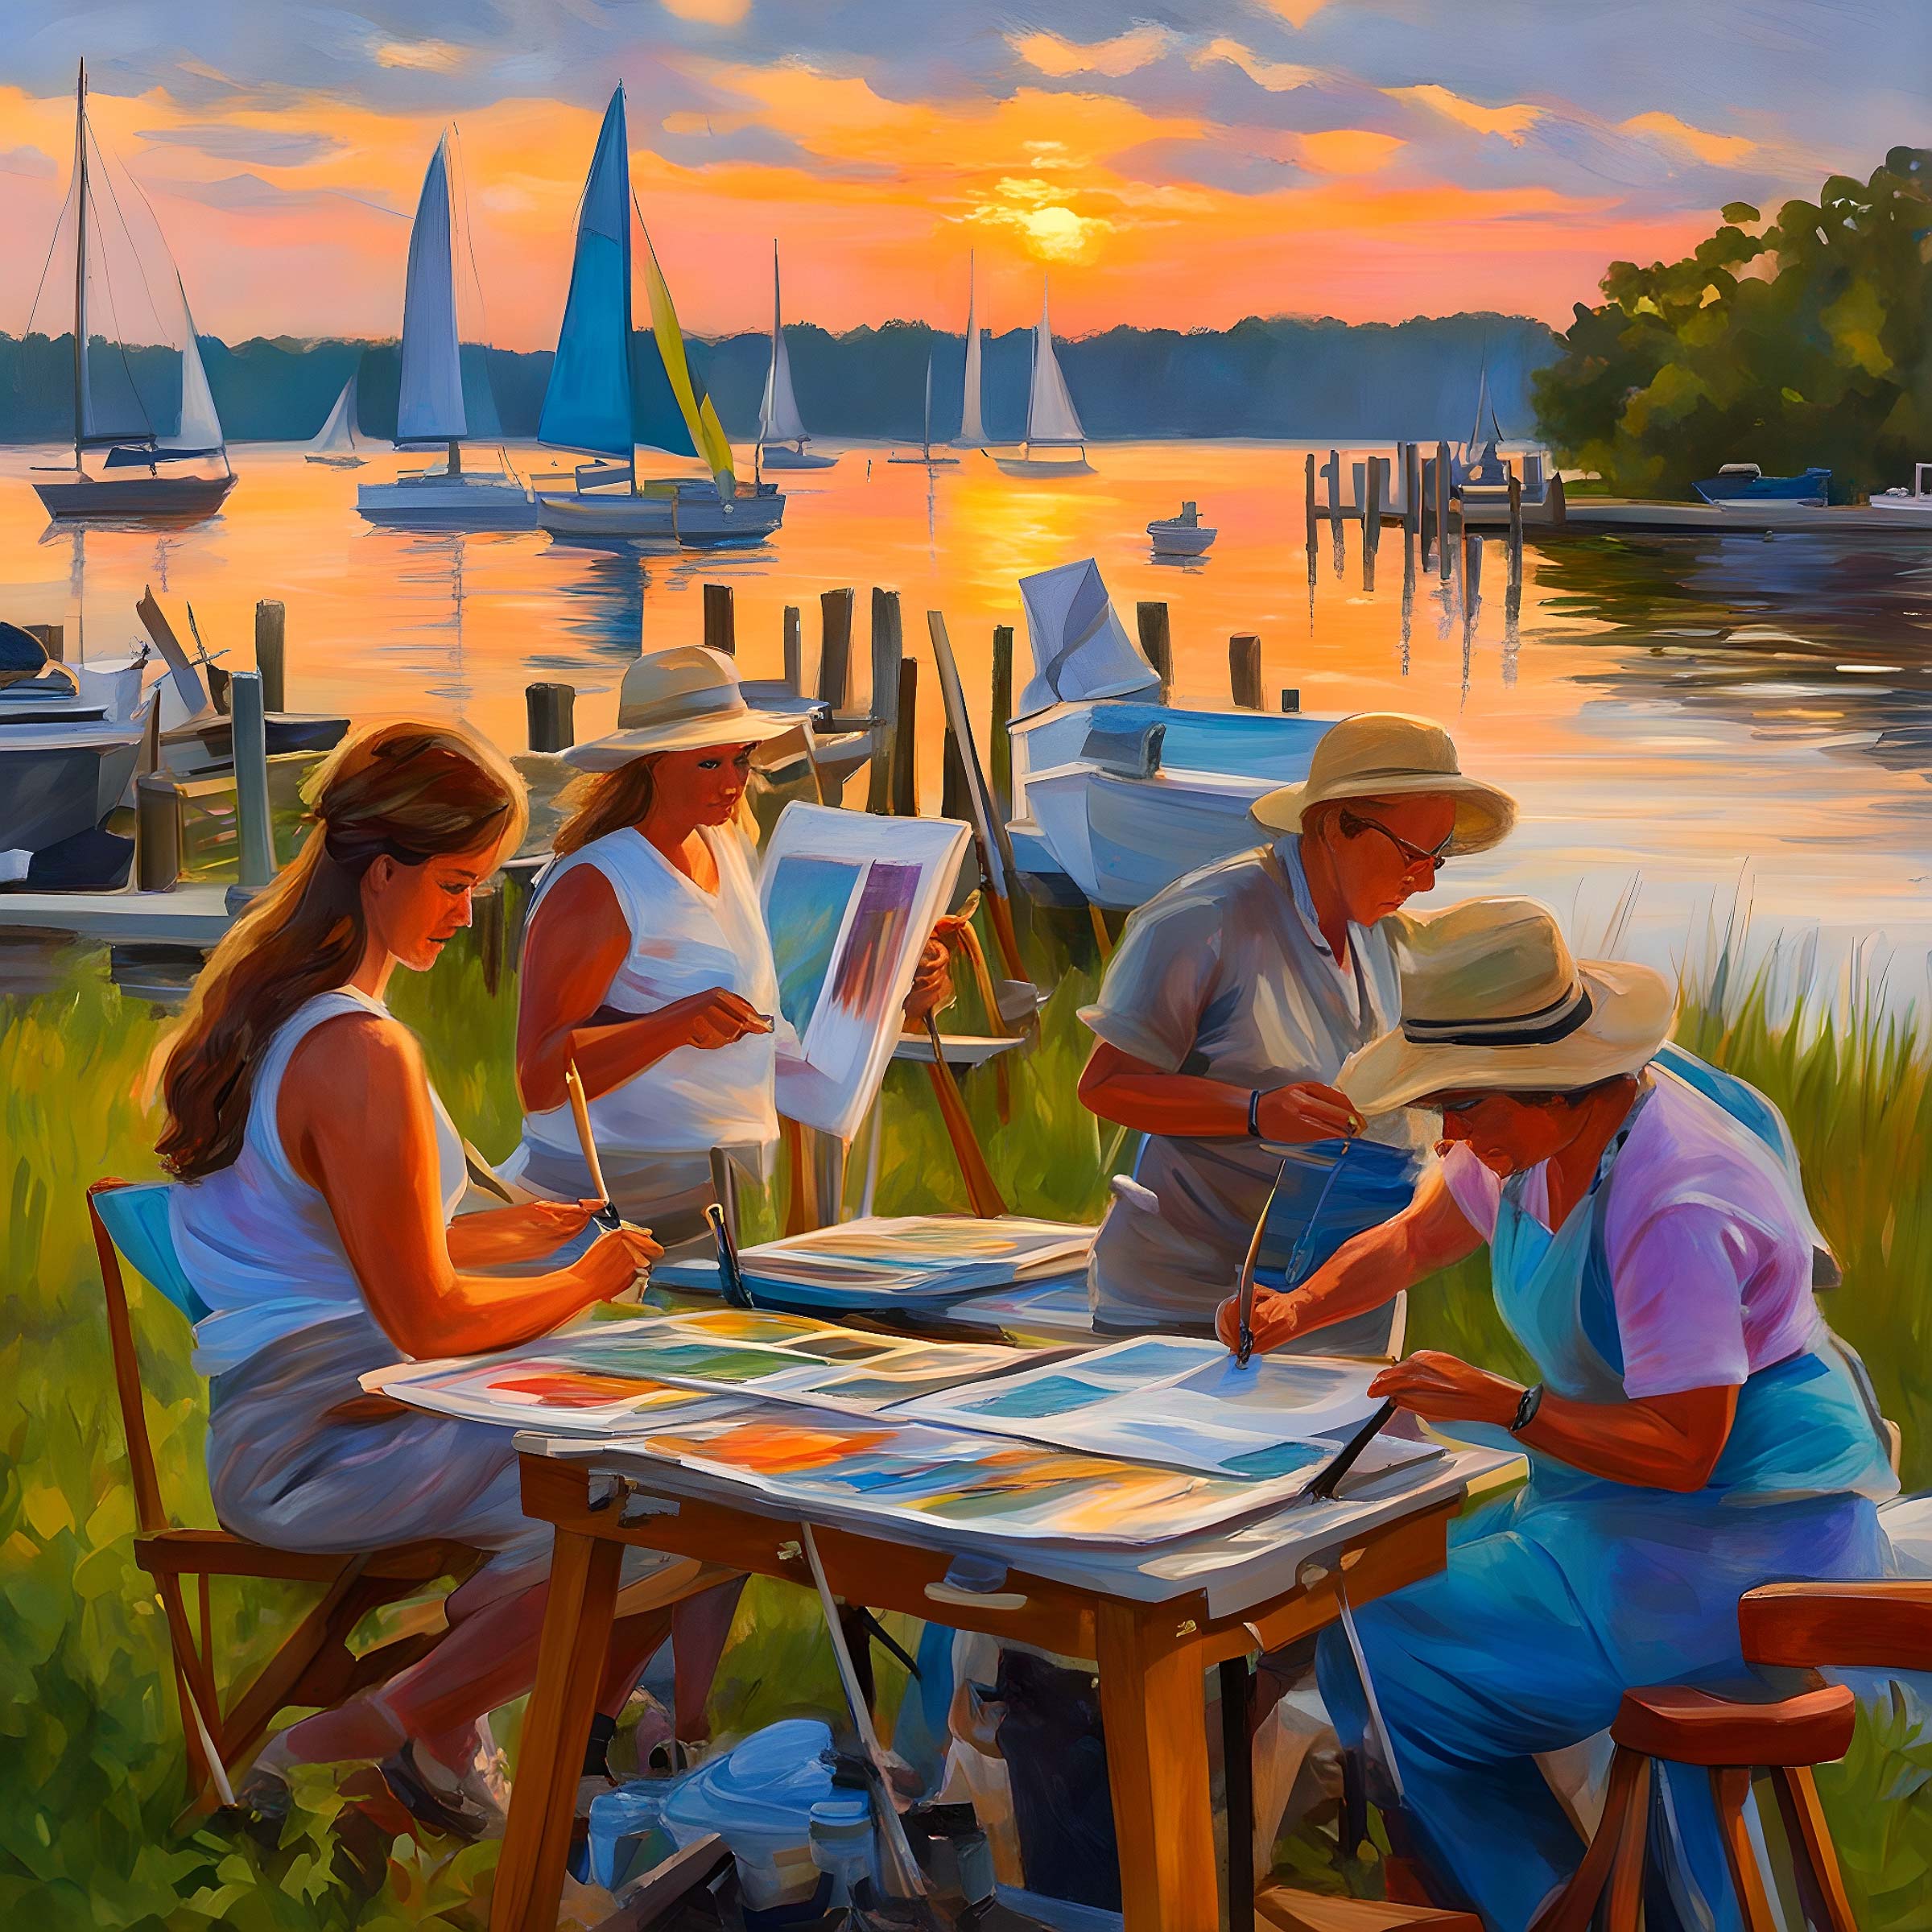 Four women artists painting outside by the sea at sunset.